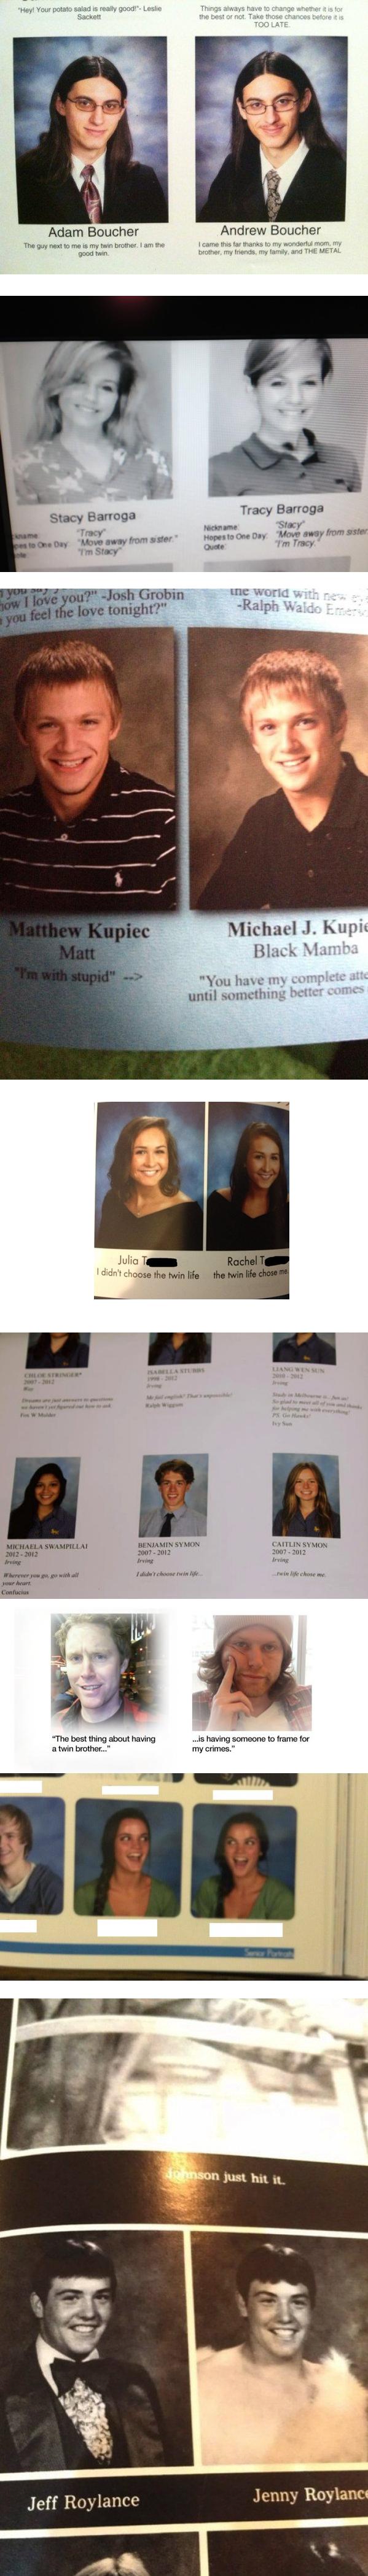 Yearbook Twins